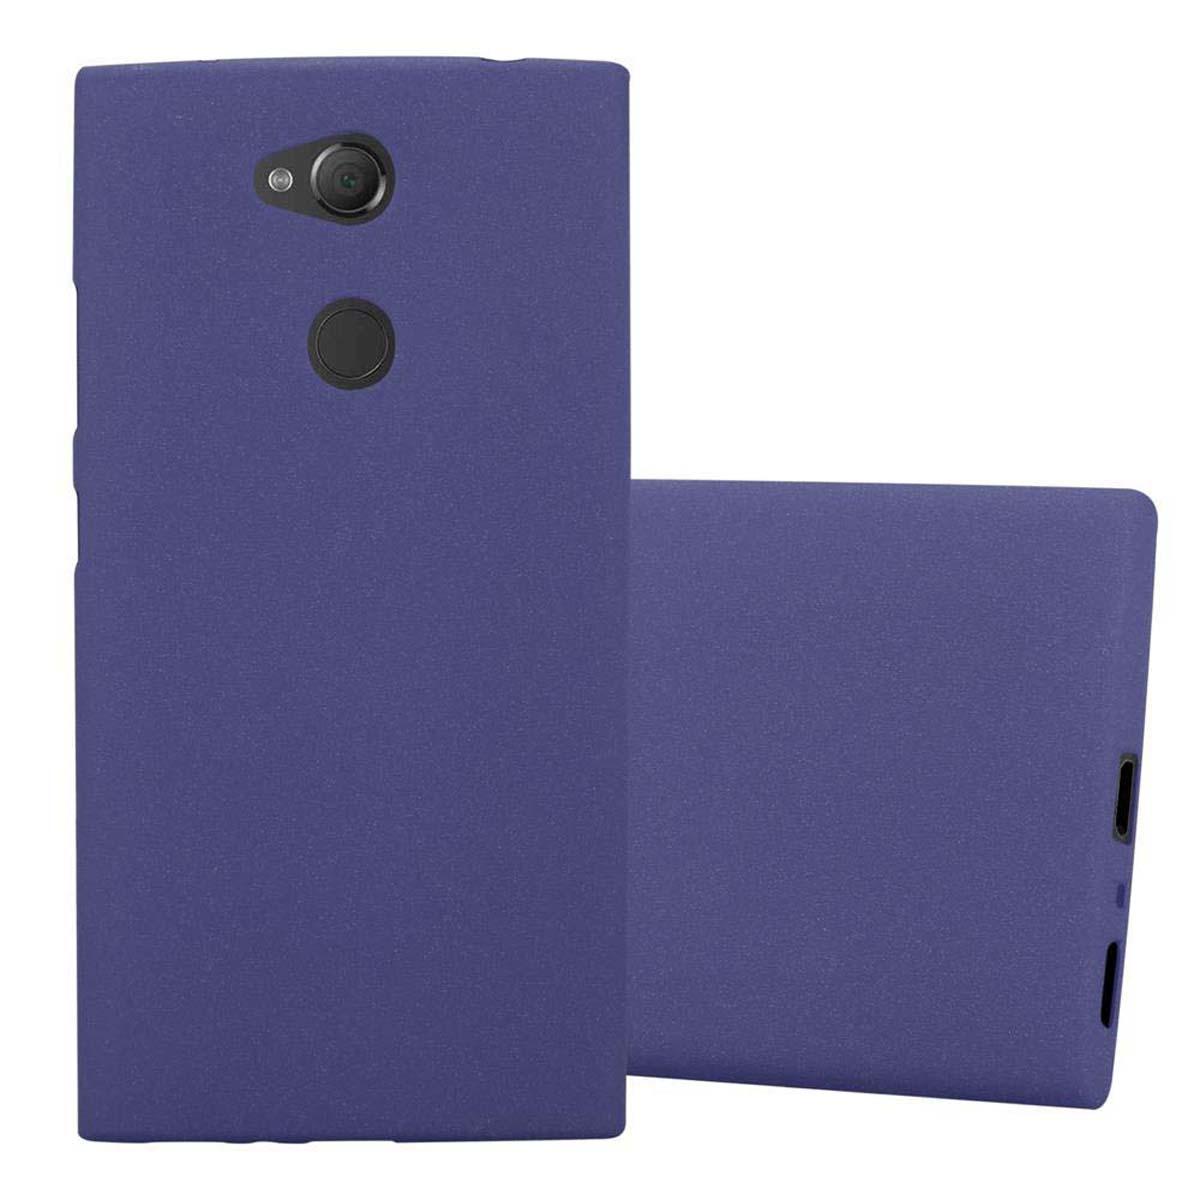 CADORABO Frosted Backcover, FROST Xperia DUNKEL BLAU Schutzhülle, L2, TPU Sony,